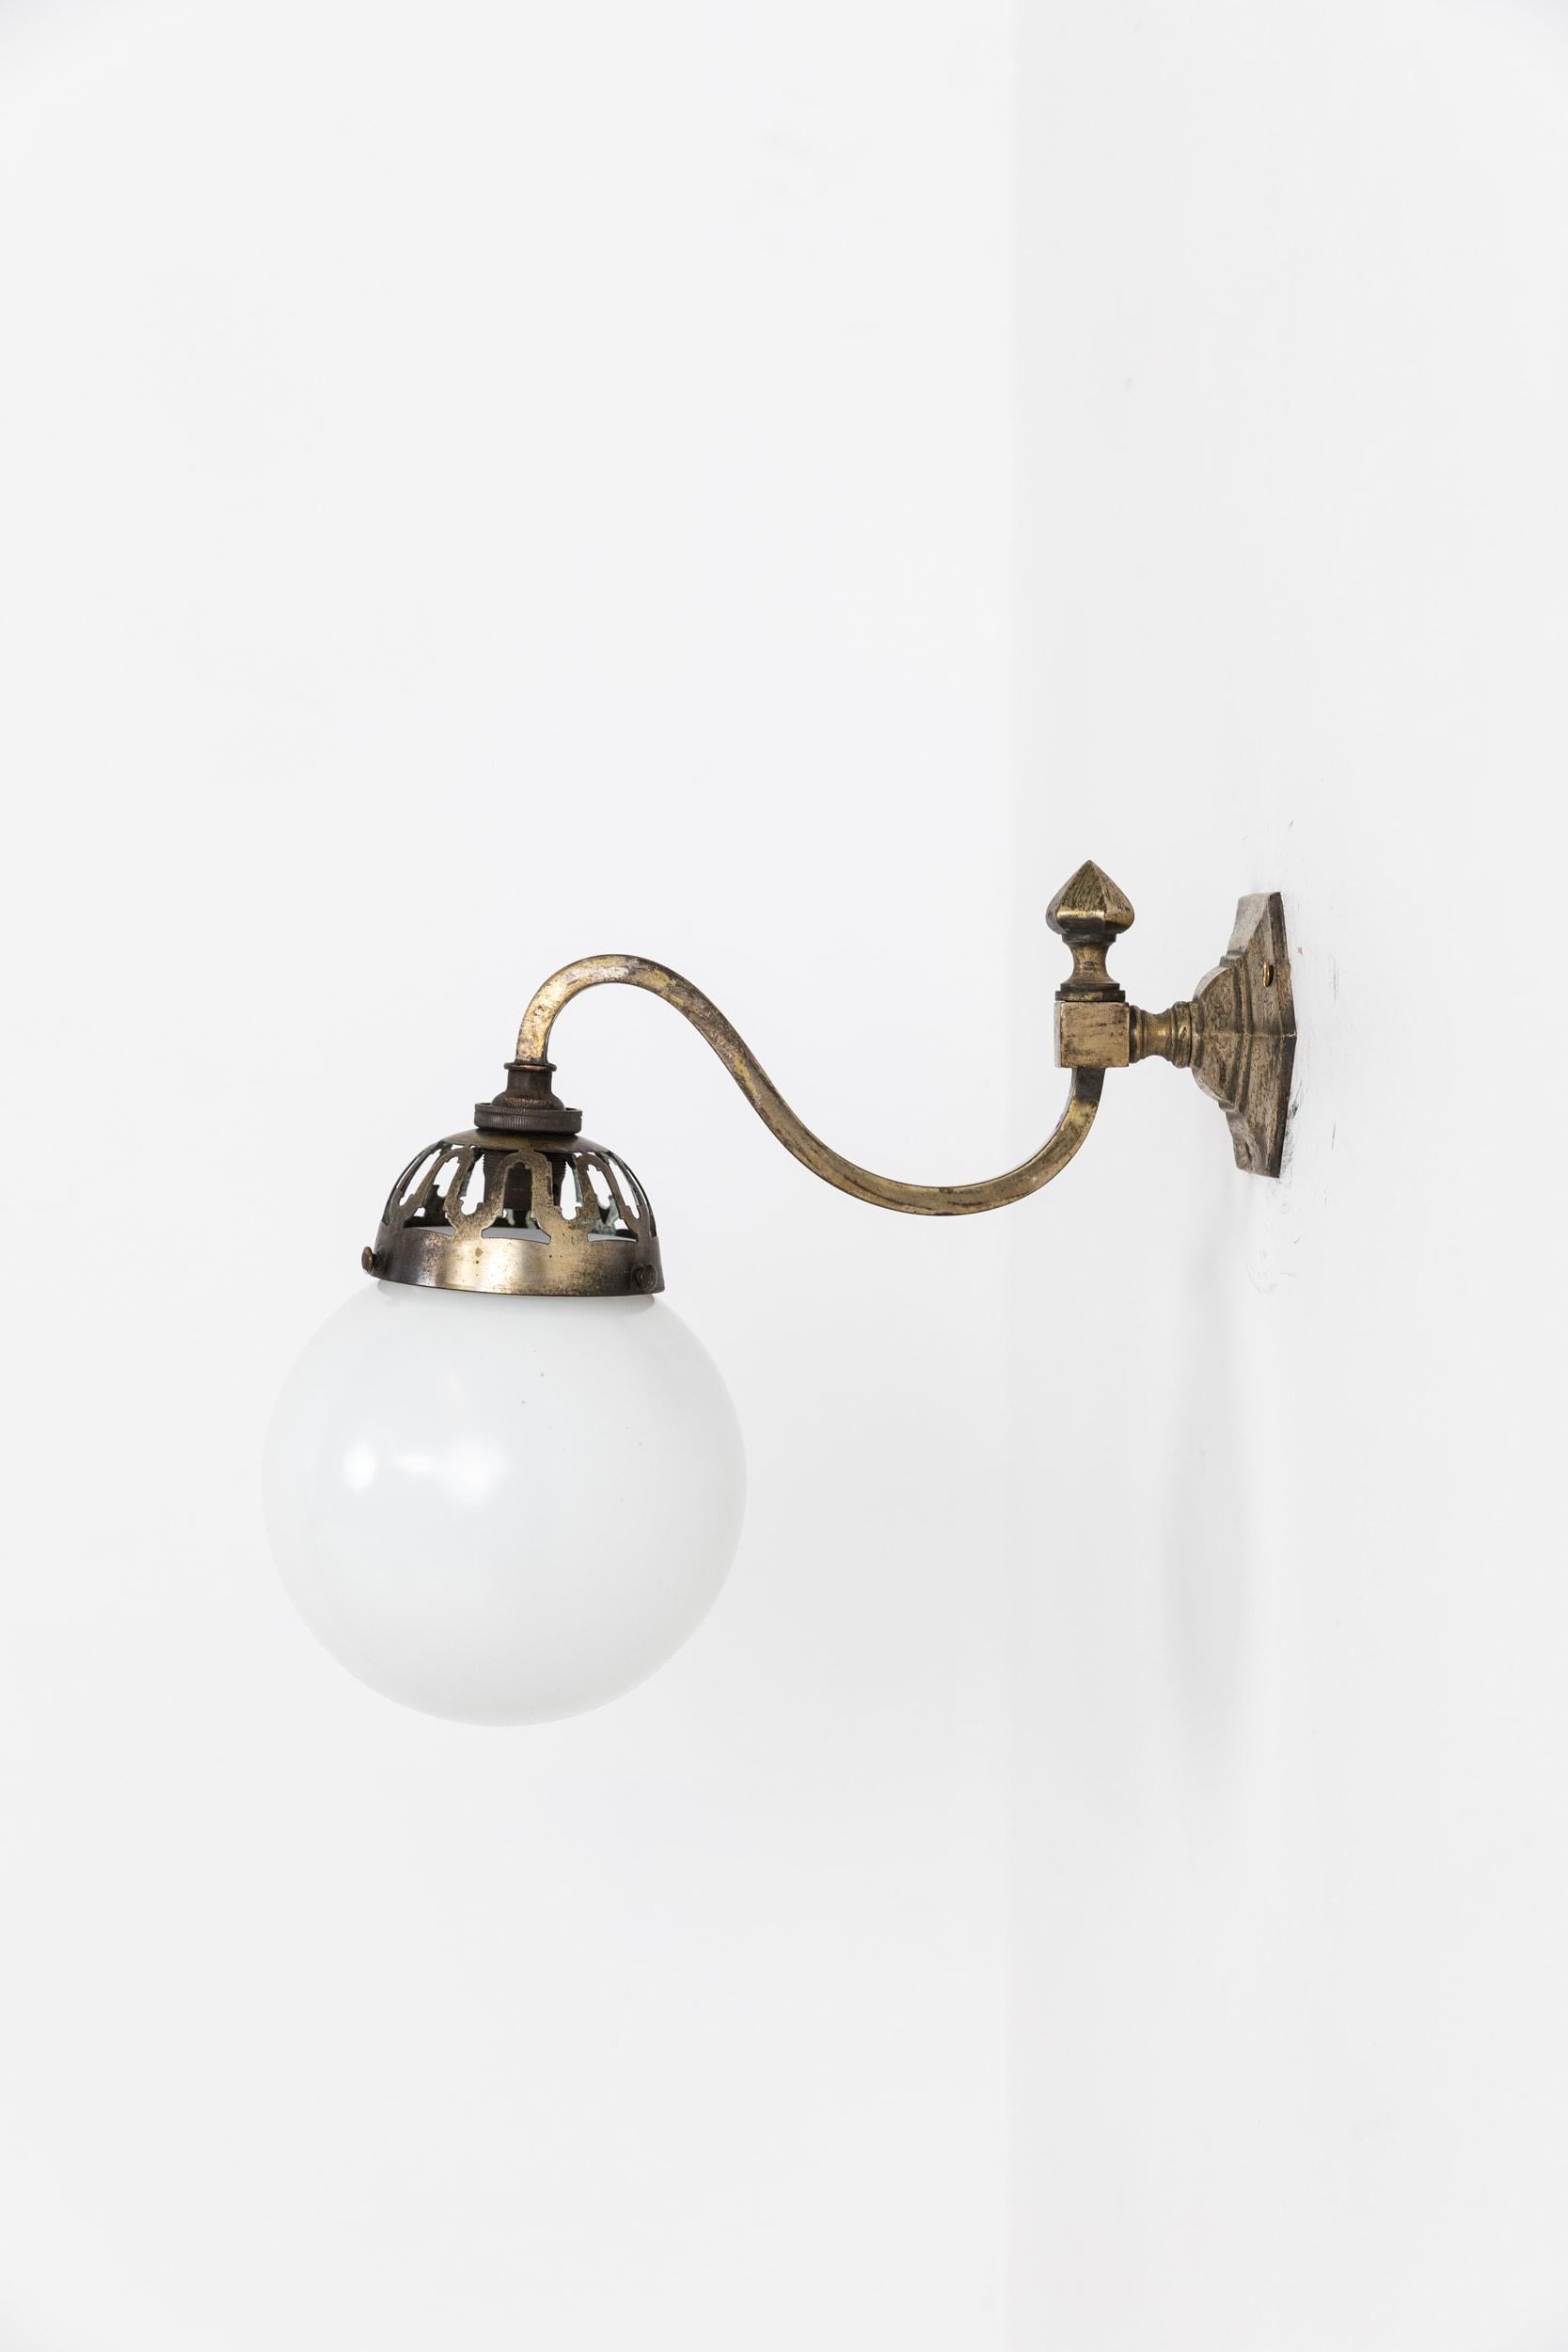 Vintage Industrial Antique Silver Plated Brass GEC Wall Lamp Sconce Light c.1920 In Fair Condition For Sale In London, GB